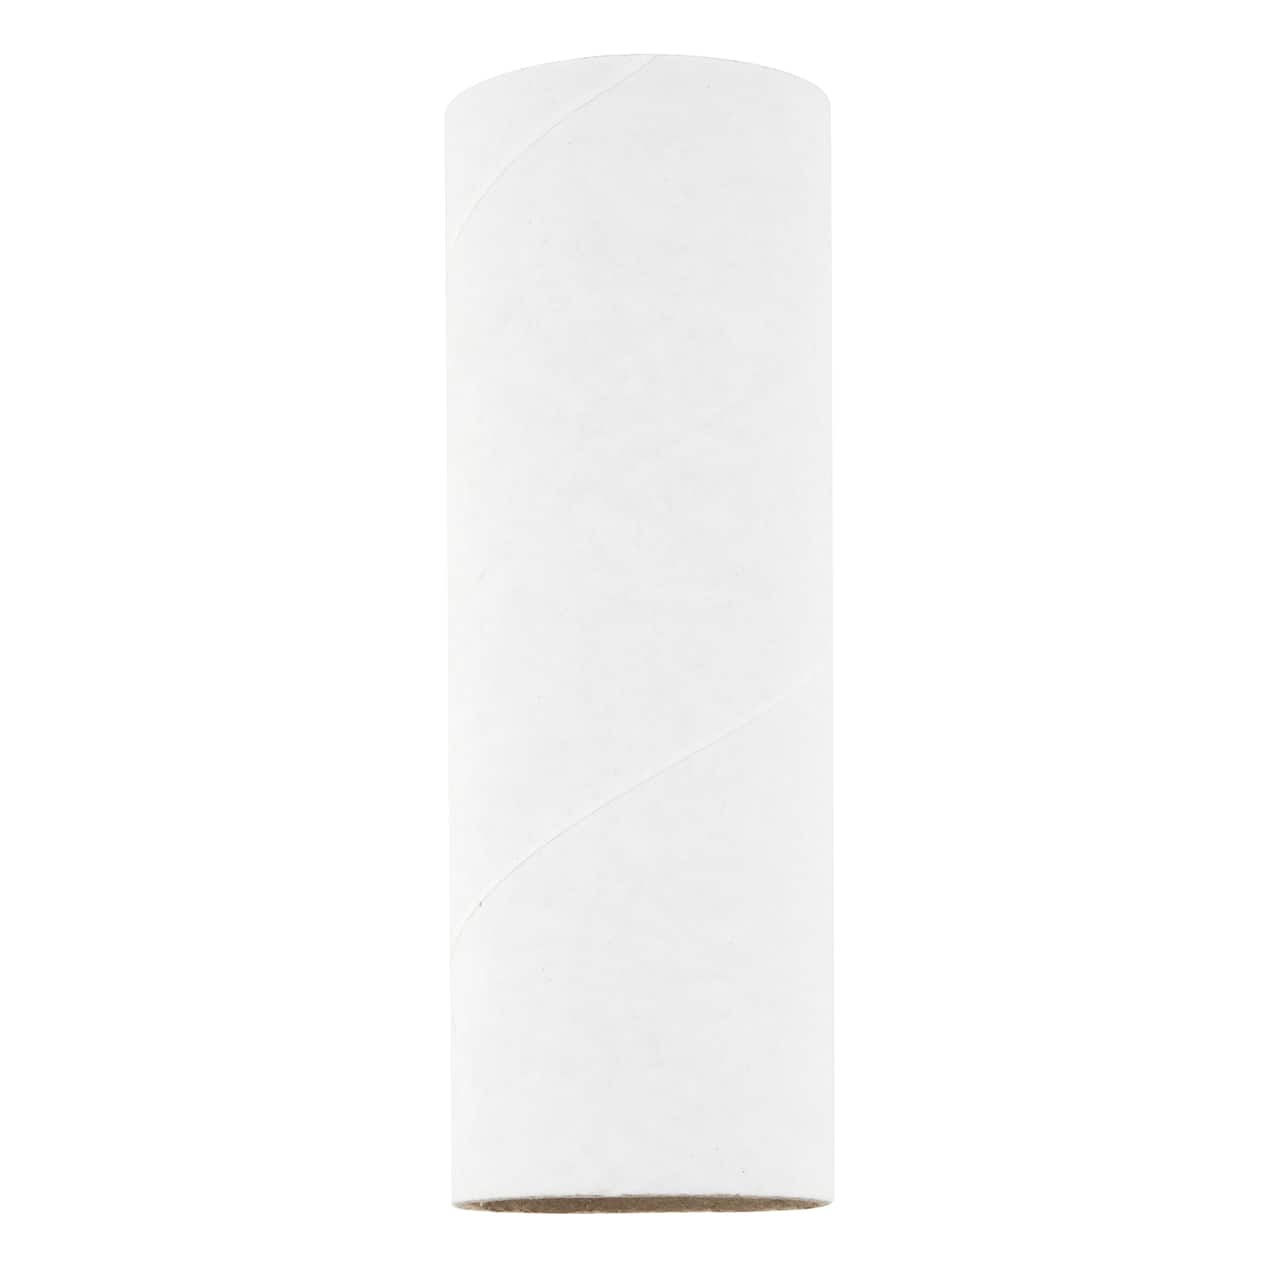 24 Packs: 12 ct. (288 total) White Paper Roll Tubes by Creatology&#x2122;